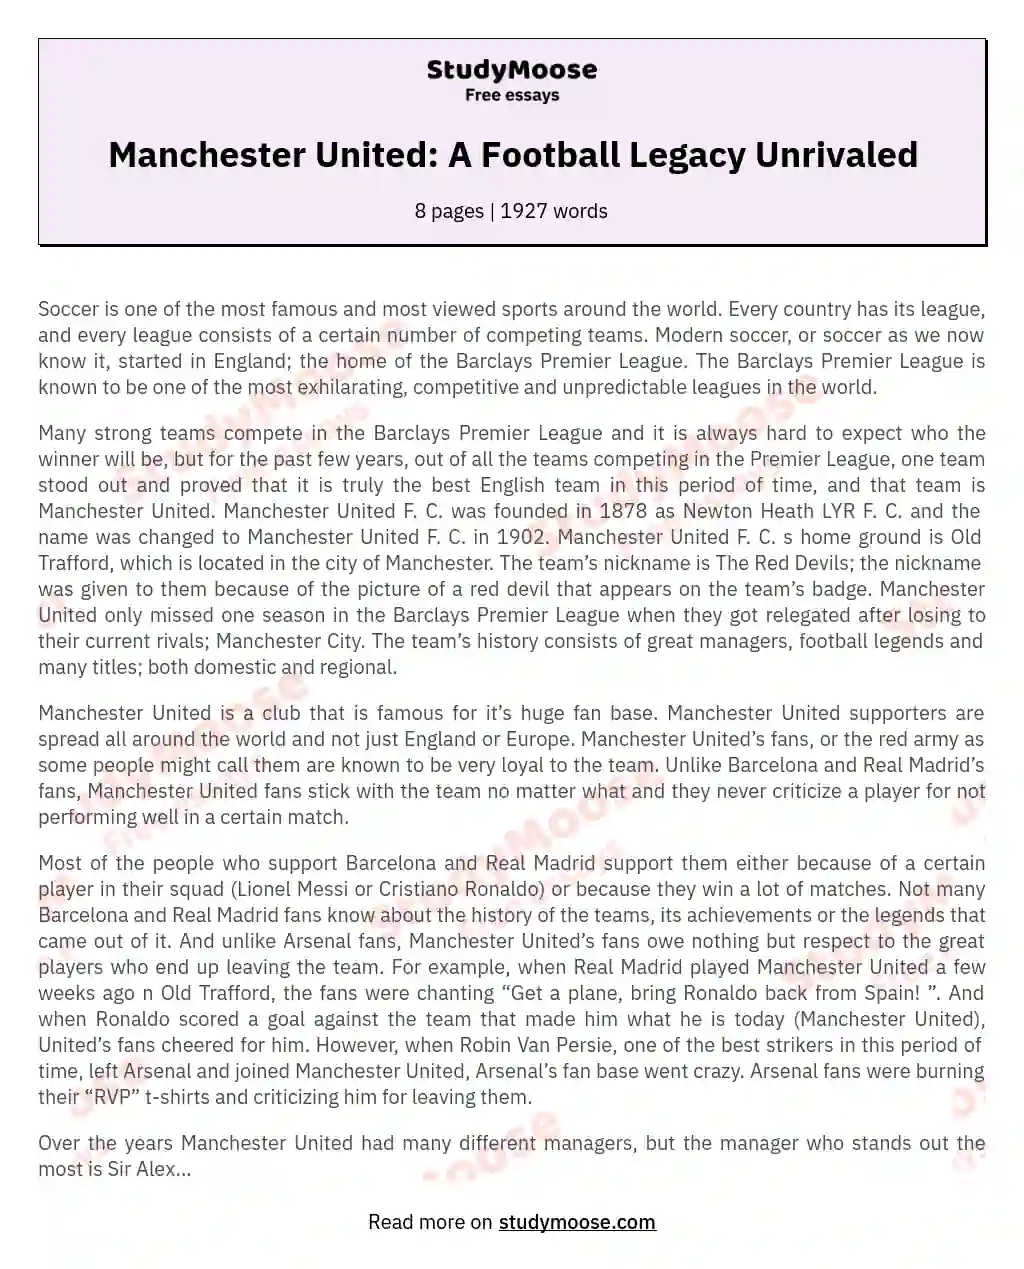 Manchester United: A Football Legacy Unrivaled essay